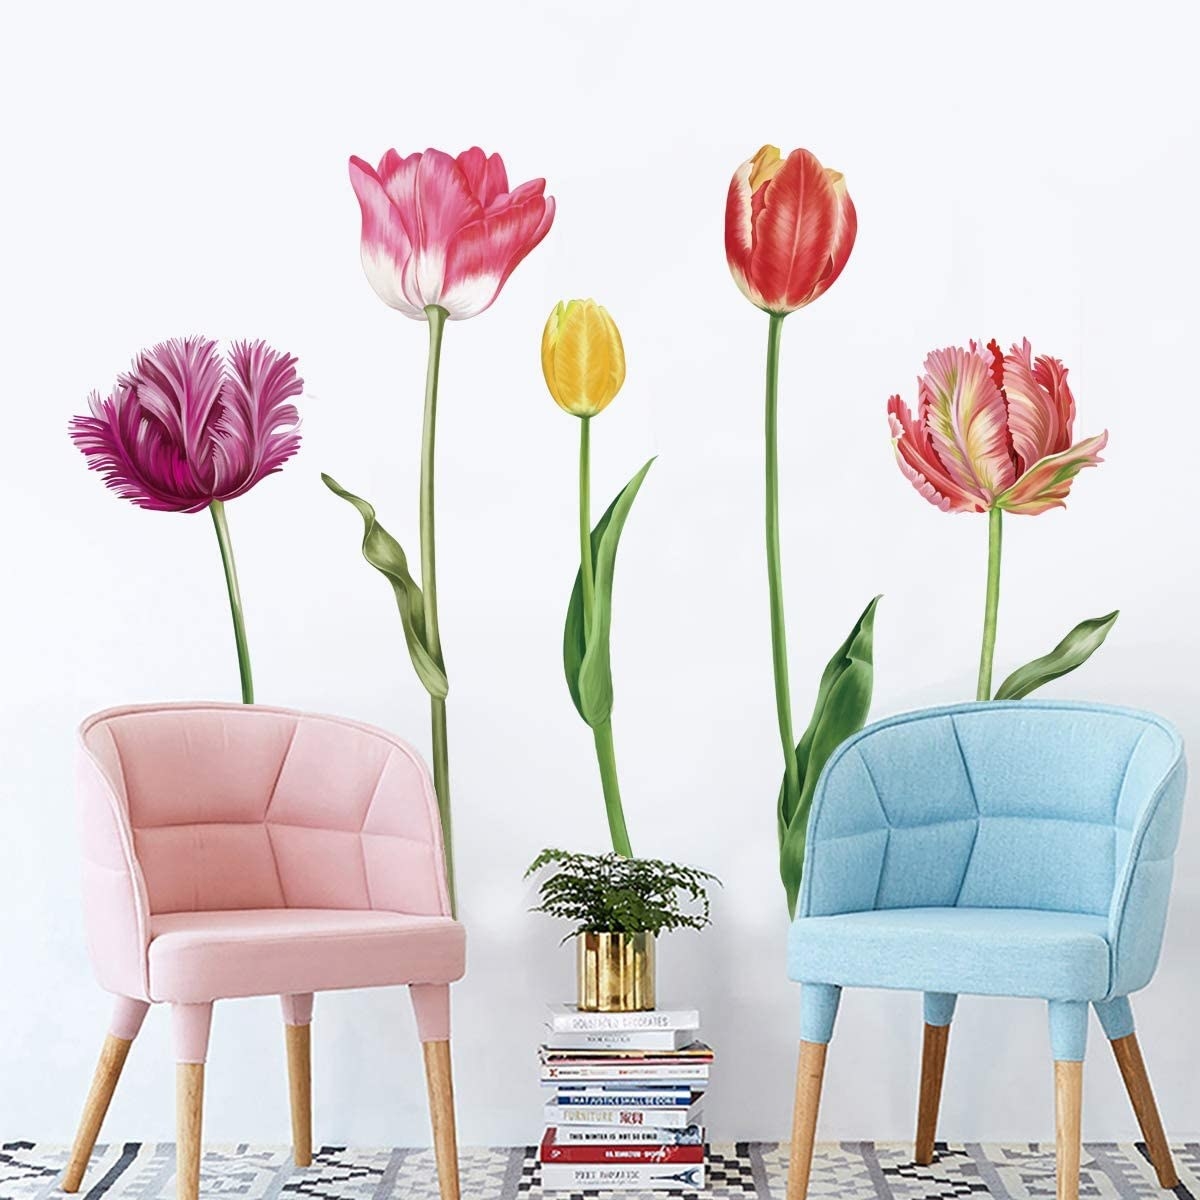 floral wall decals behind chairs and a stack of books